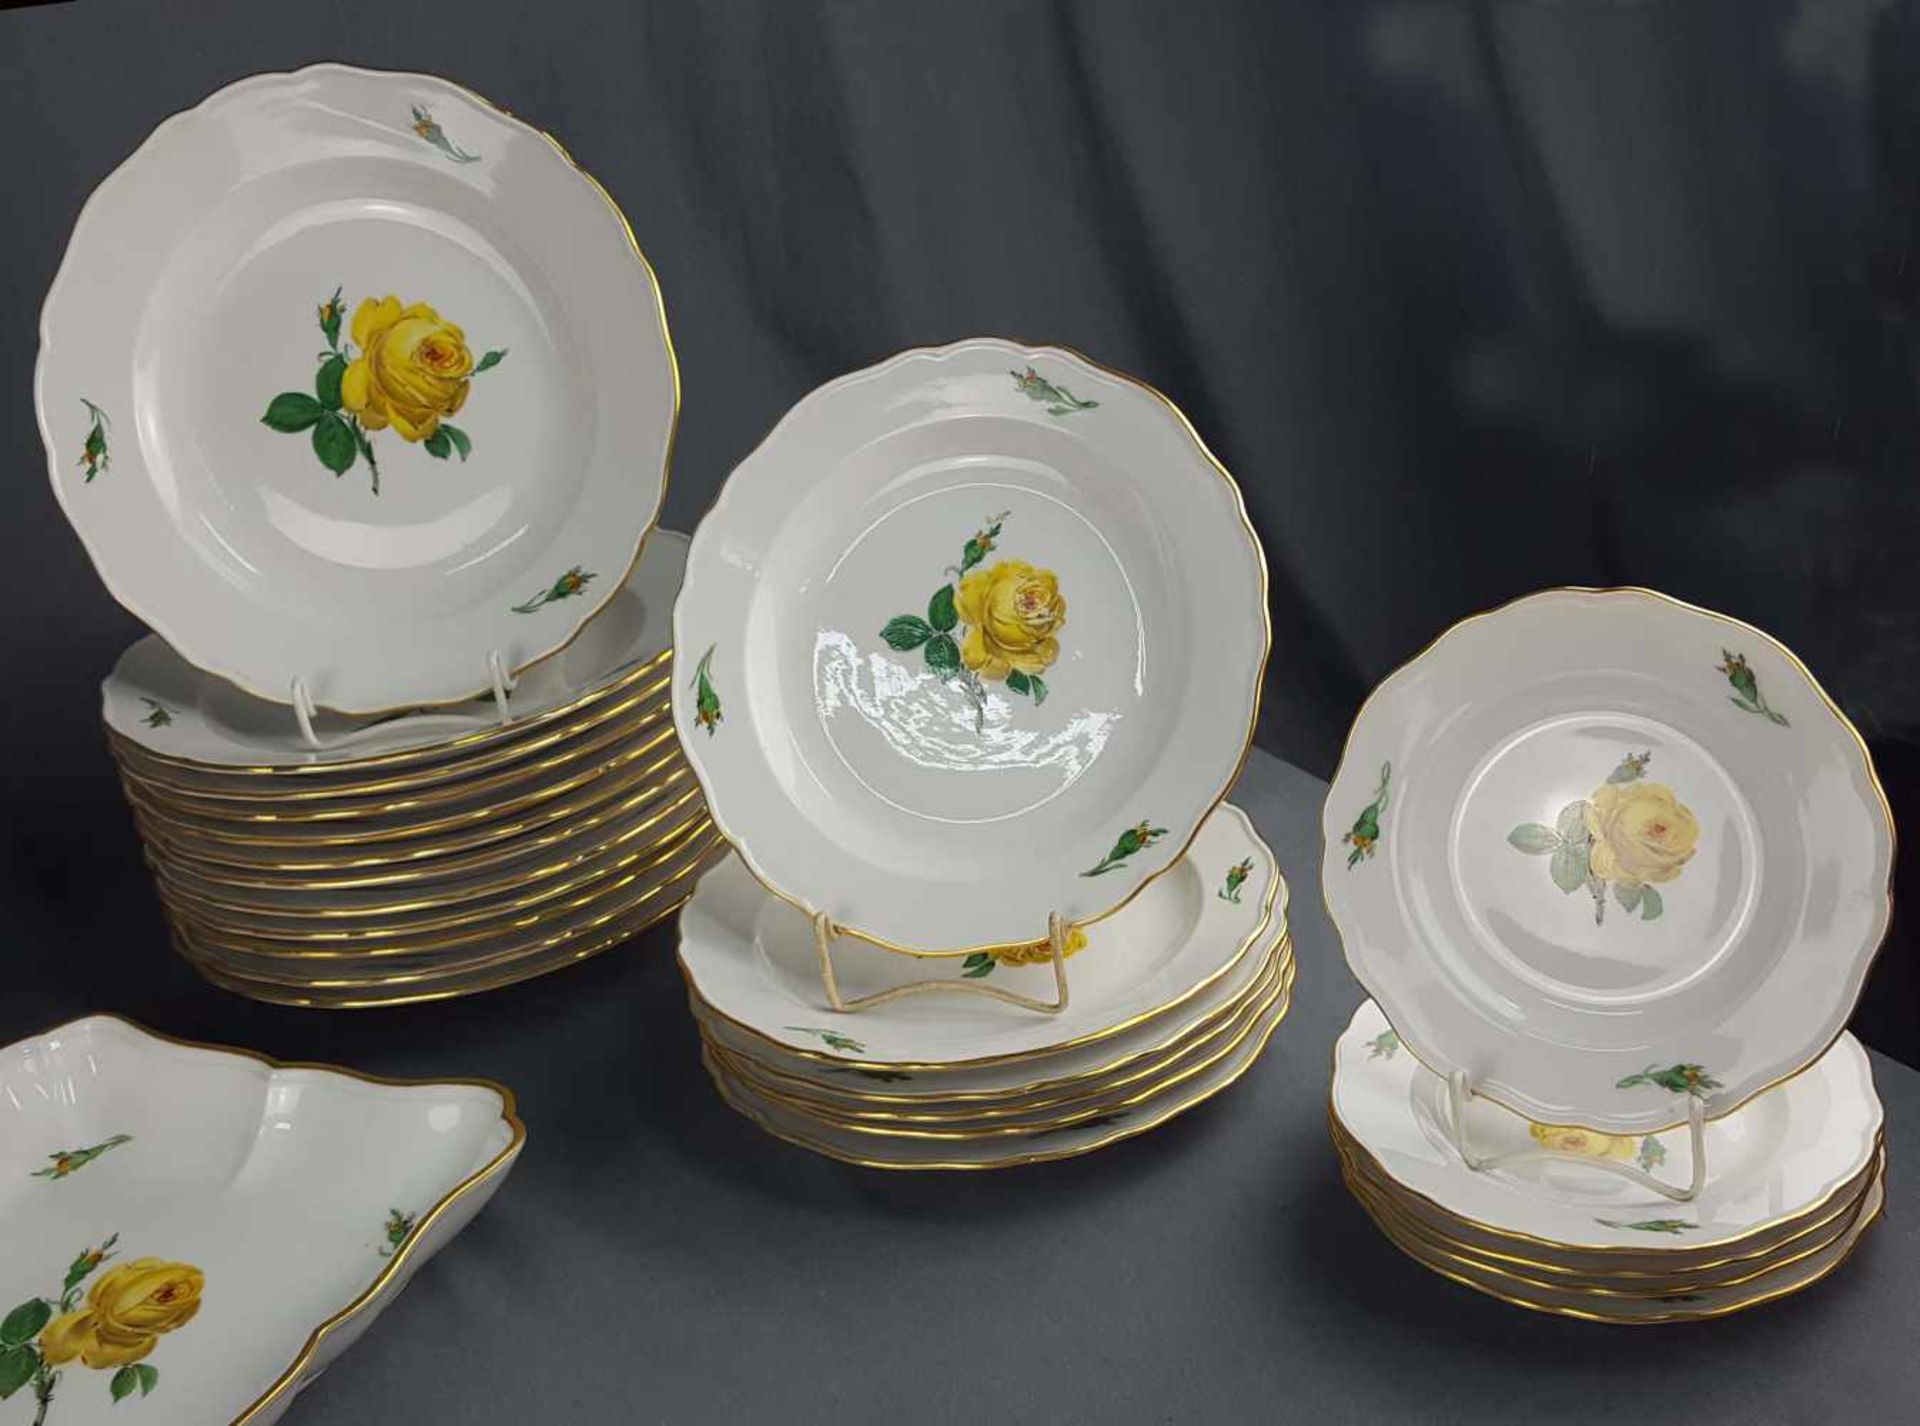 Dining service Meissen porcelain, yellow rose with gold rim. - Image 14 of 18